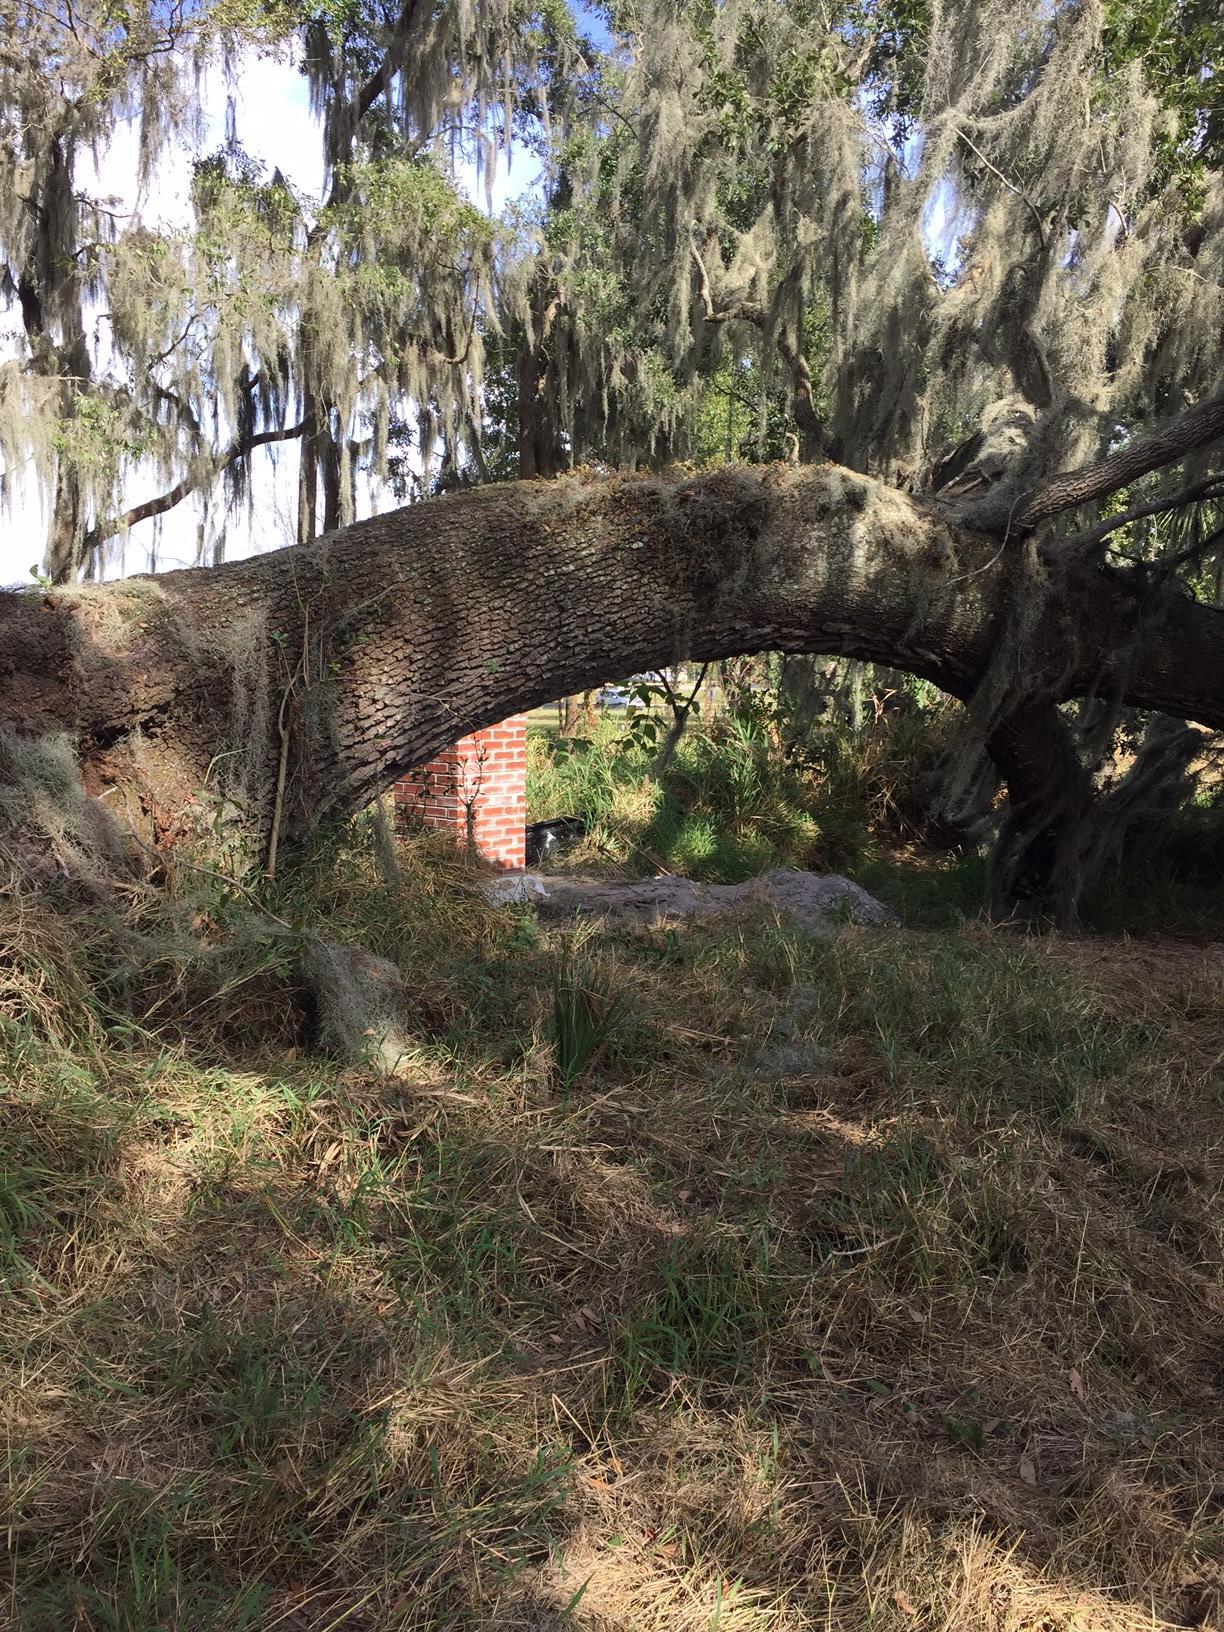 This oak tree in Oakland Park fell during a storm a few months ago.